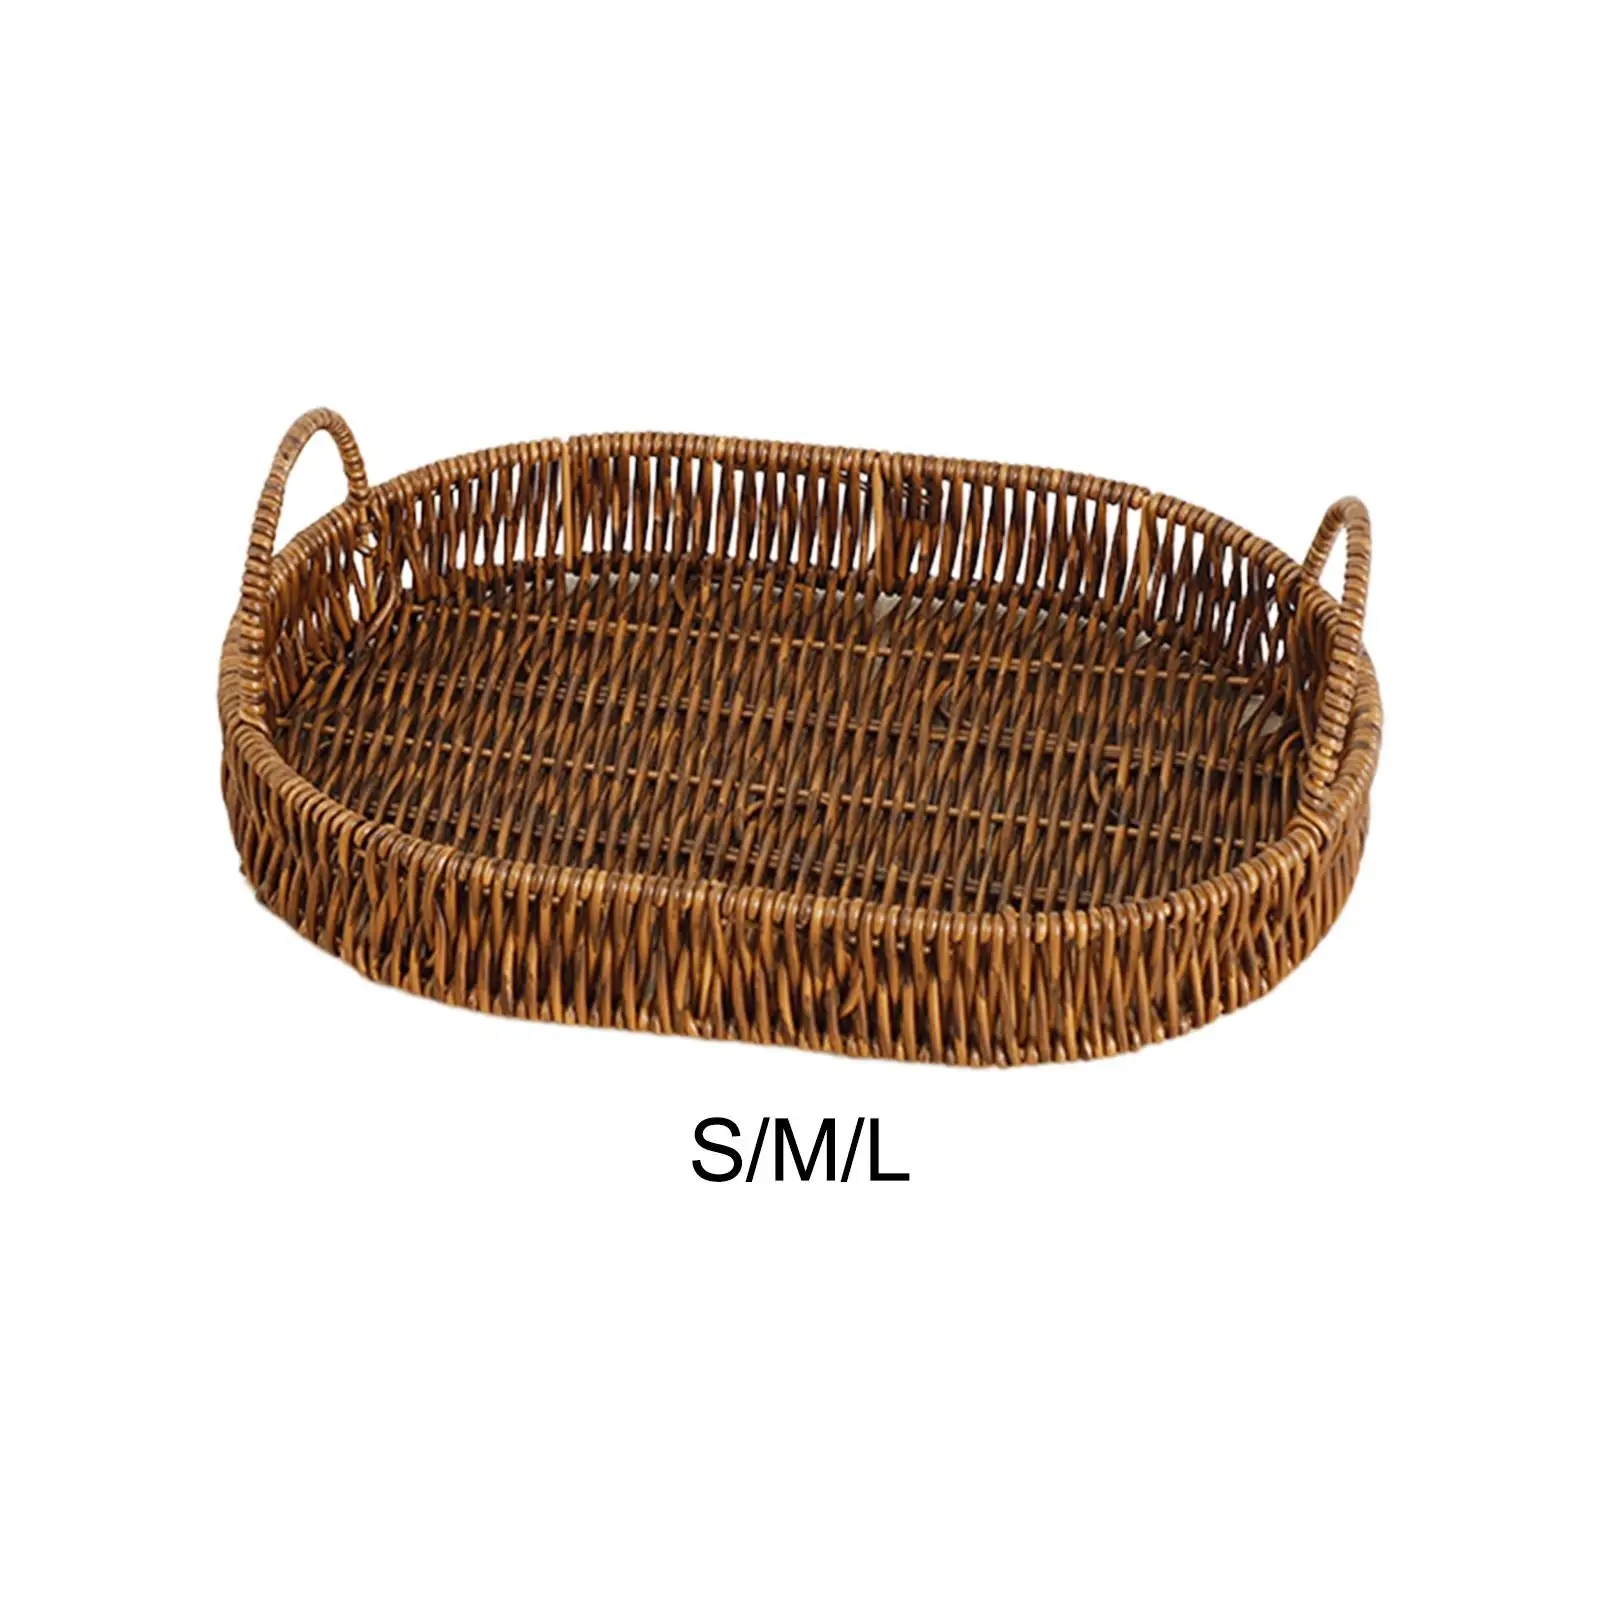 Handmade Woven Fruit Basket Organizer Decorative Wicker Woven Basket for Dining Coffee Table Restaurant Vegetables Hotel Fruits